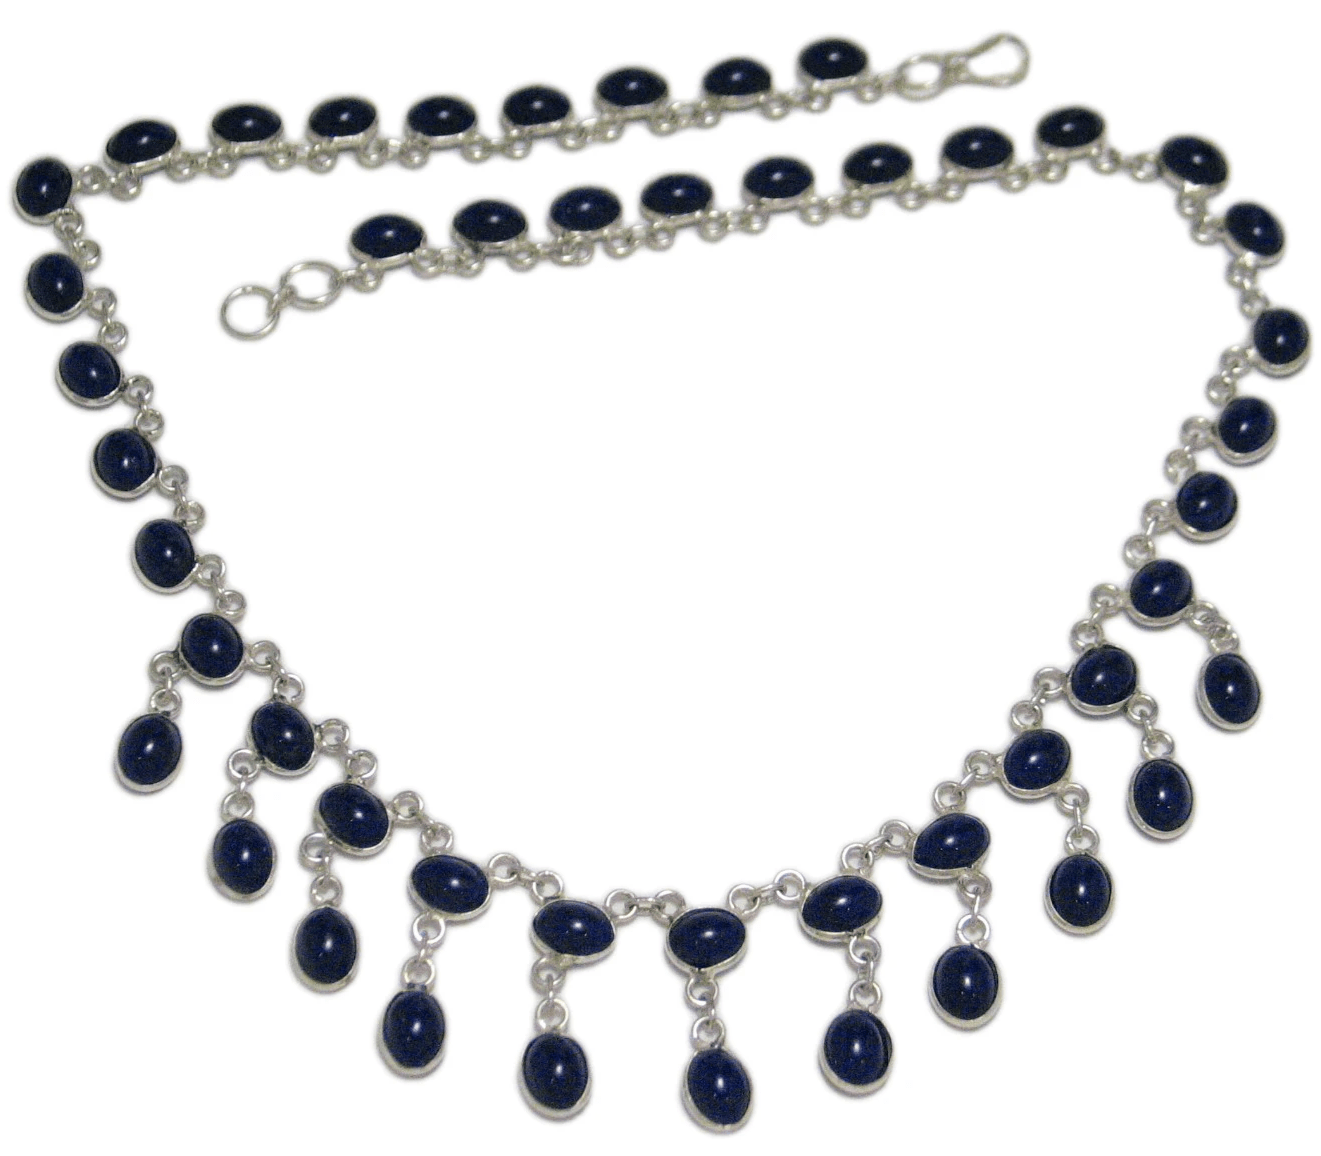 Jewelry > Necklaces > Womens Beautiful Sterling Silver Blue Collar Bib Necklace - Blingschlingers Jewelry